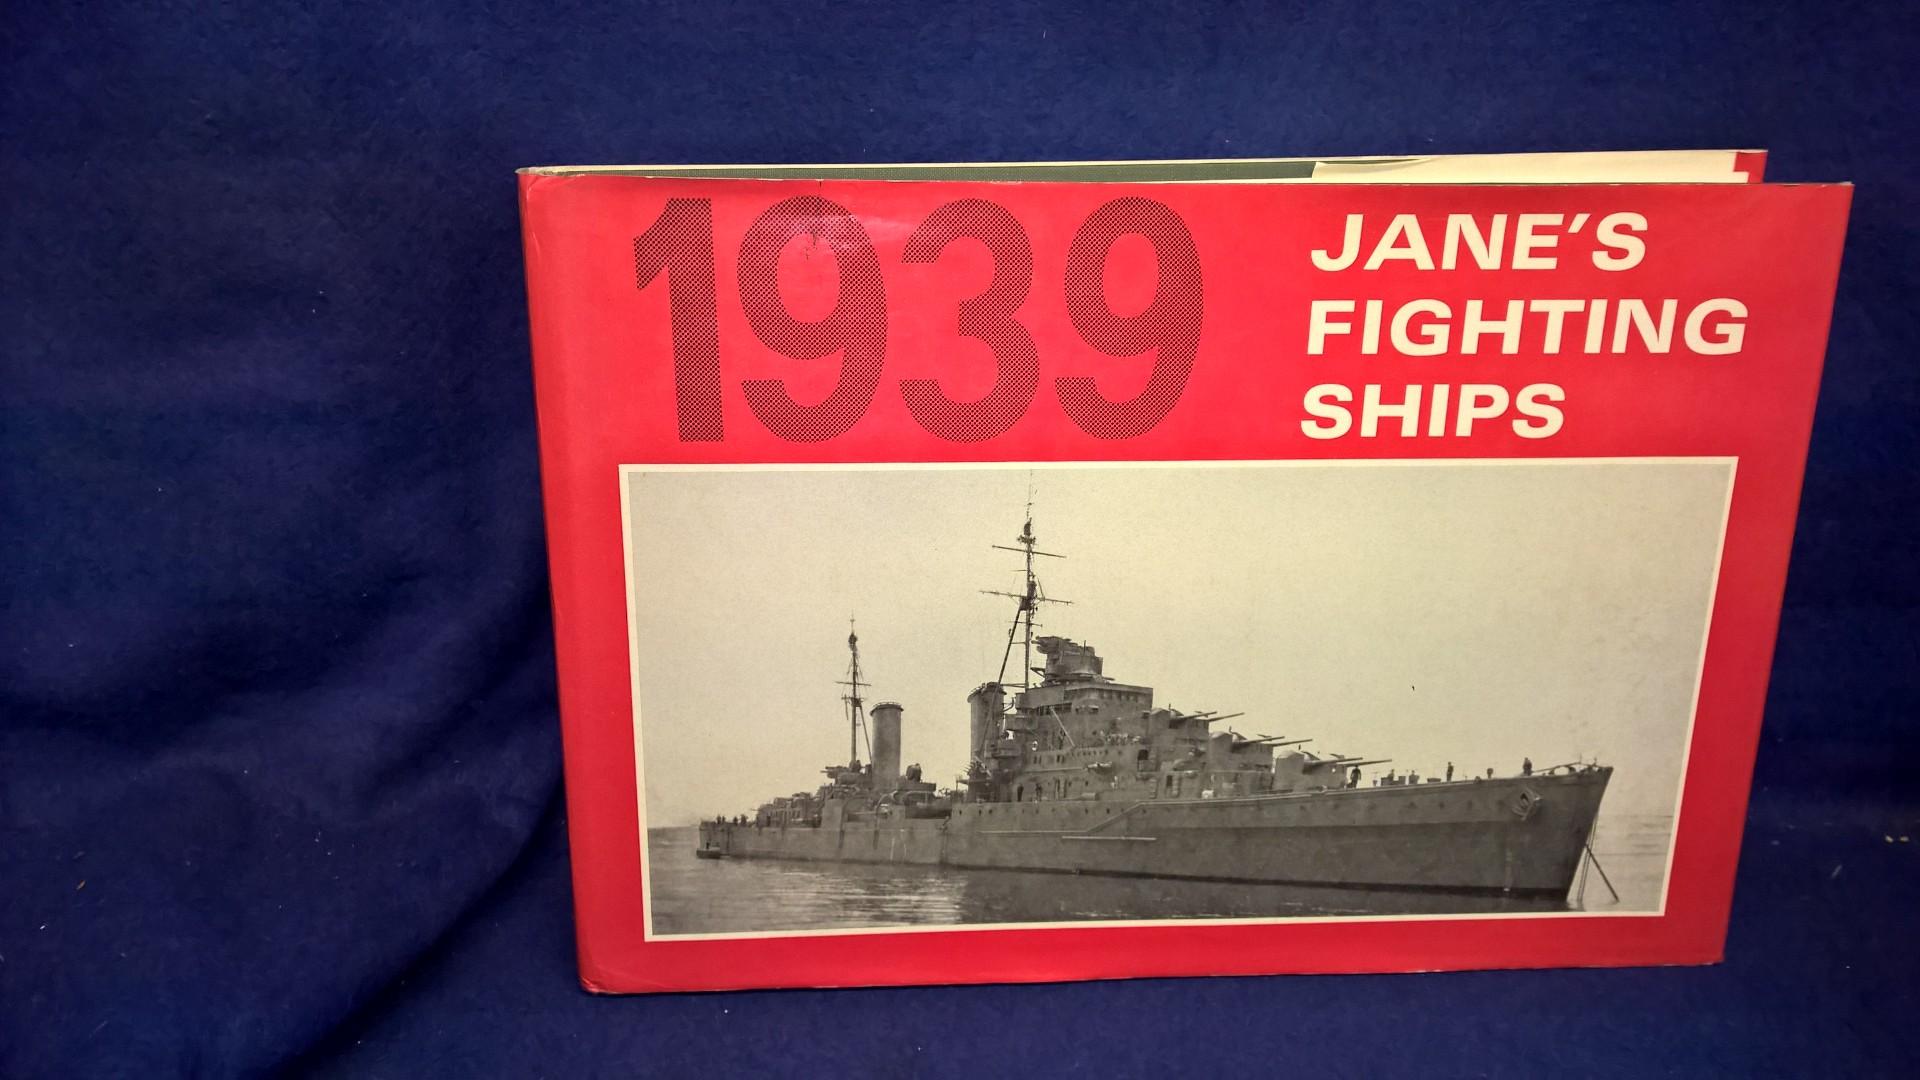 Jane's Fighting Ships, 1939. A reprint of the 1939 Edition of Fighting Ships.